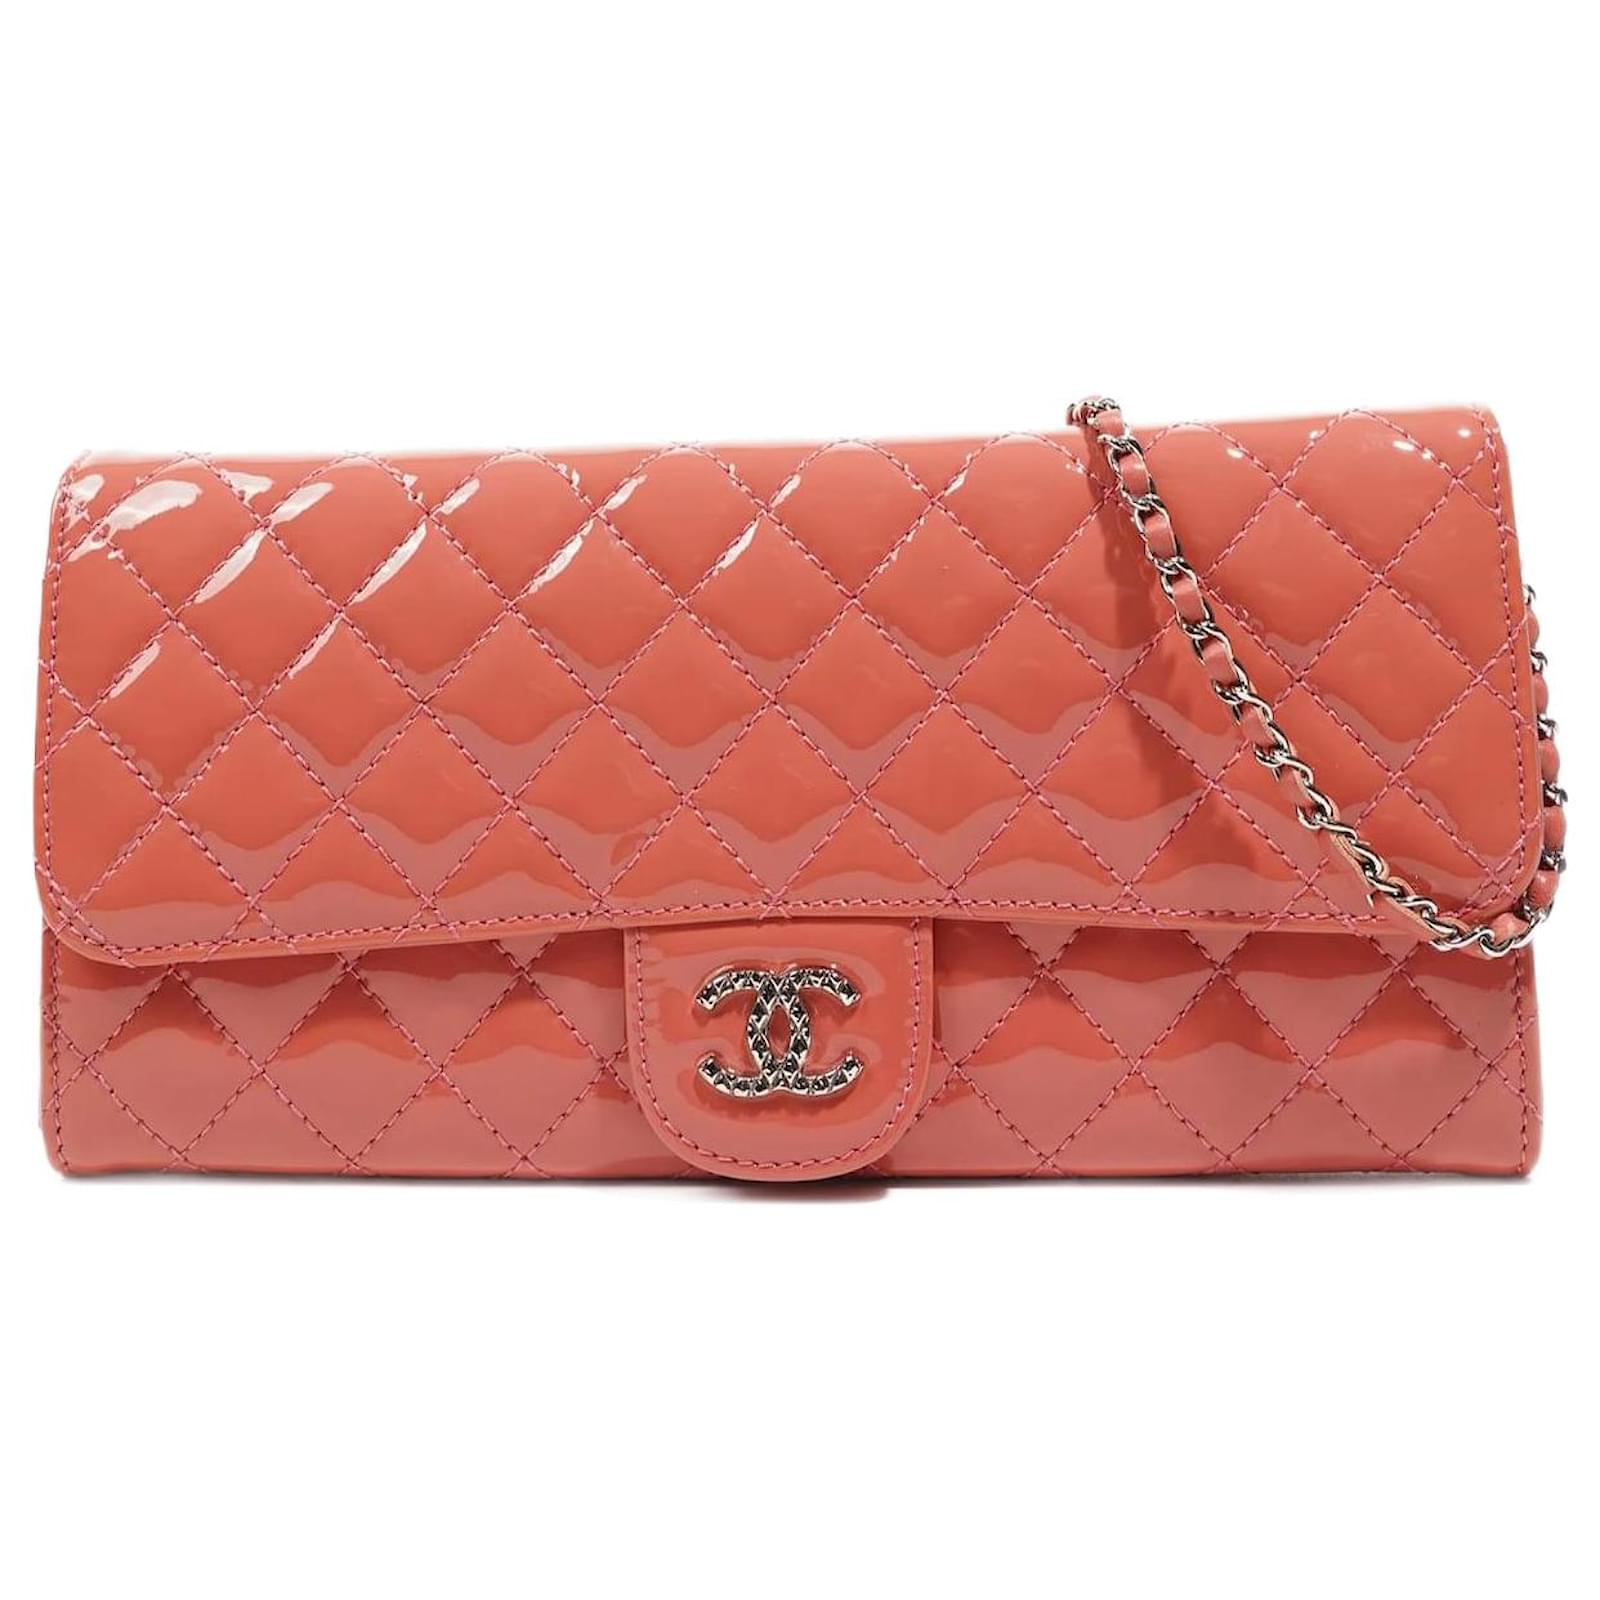 Chanel Coral Lizard Wallet on Chain